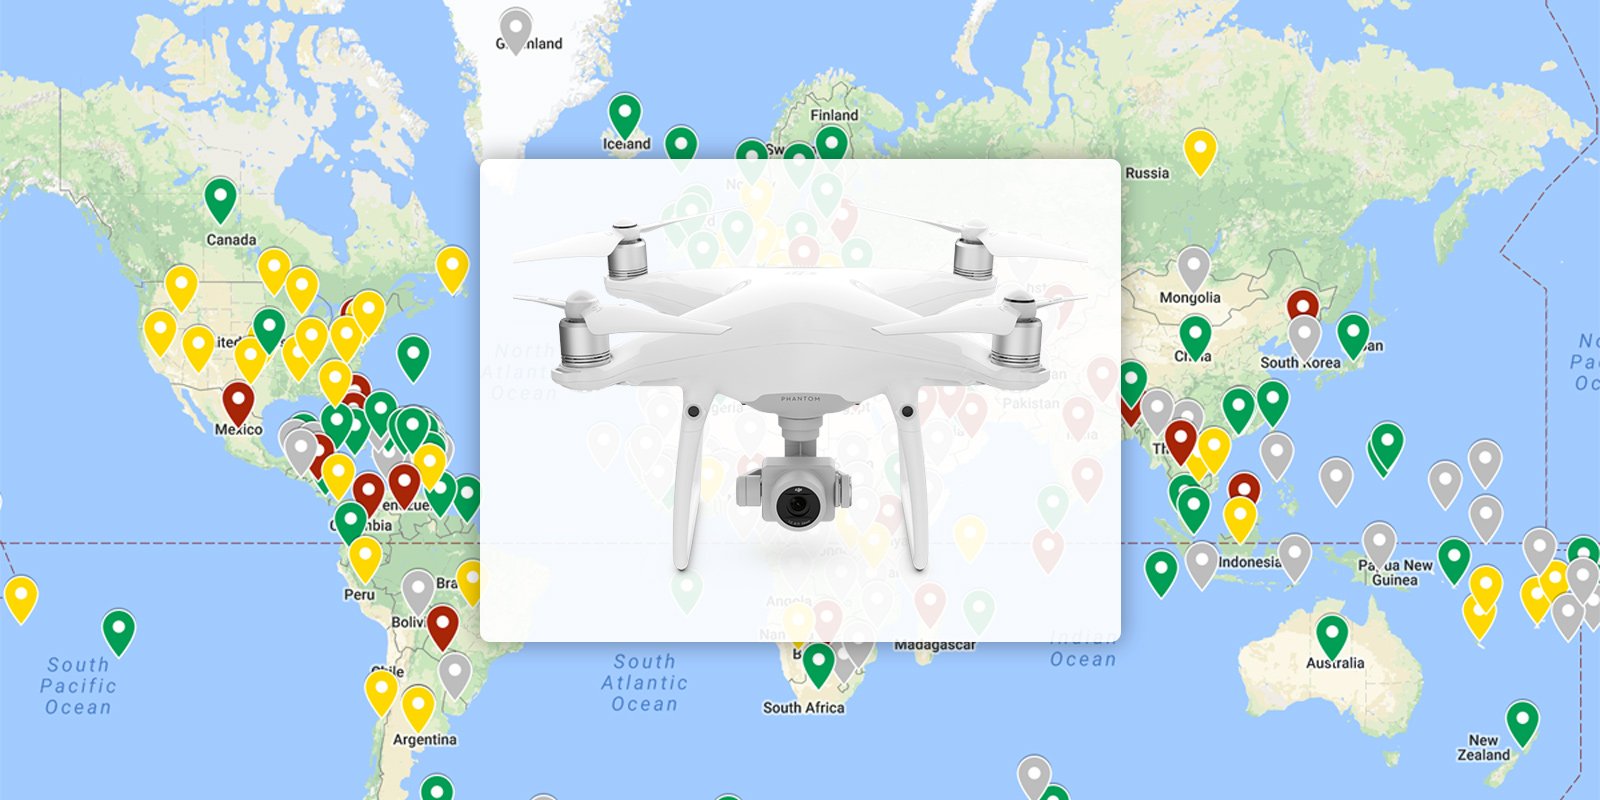 Plantation Unevenness repetition Here's a Map with Up-to-Date Drone Laws For Every Country | PetaPixel